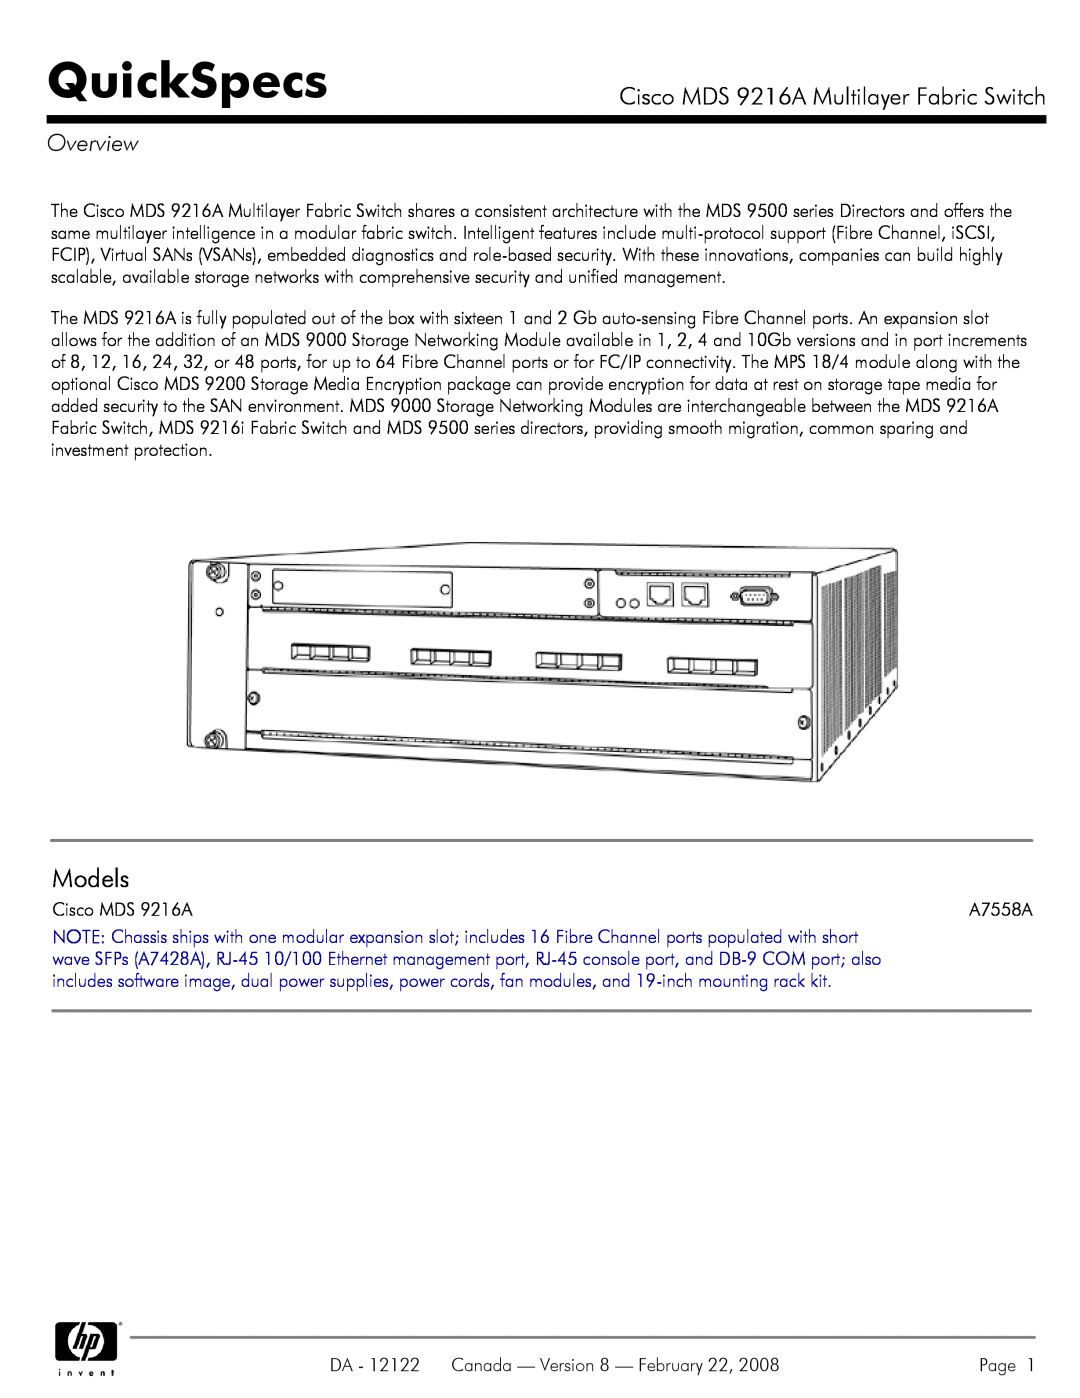 Cisco Systems manual QuickSpecs, Models, Cisco MDS 9216A Multilayer Fabric Switch, Overview 